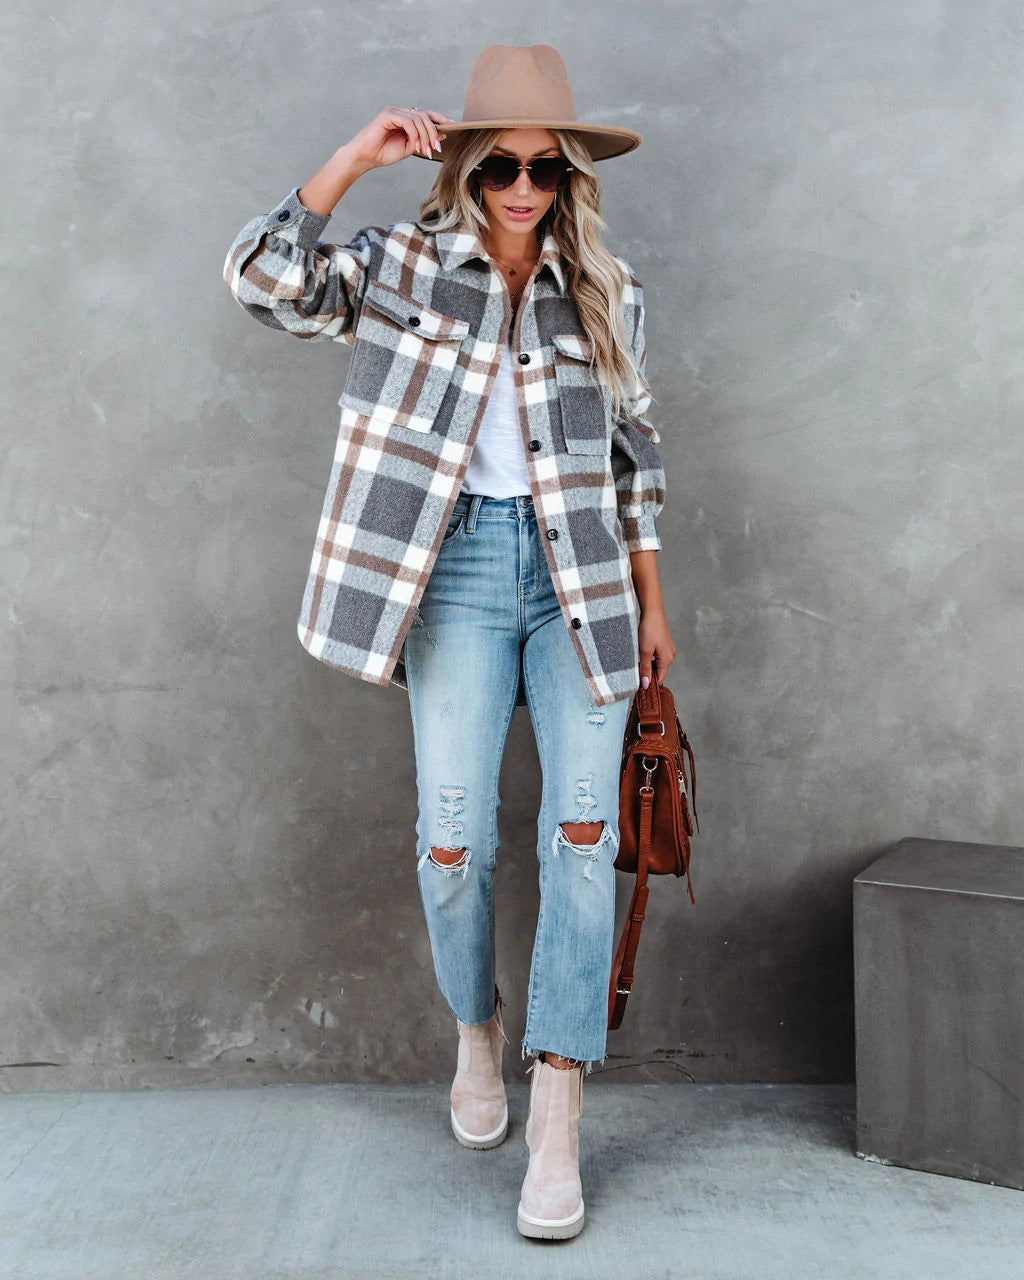 Casual Autumn Winter Plaid Brushed Collared Jacket